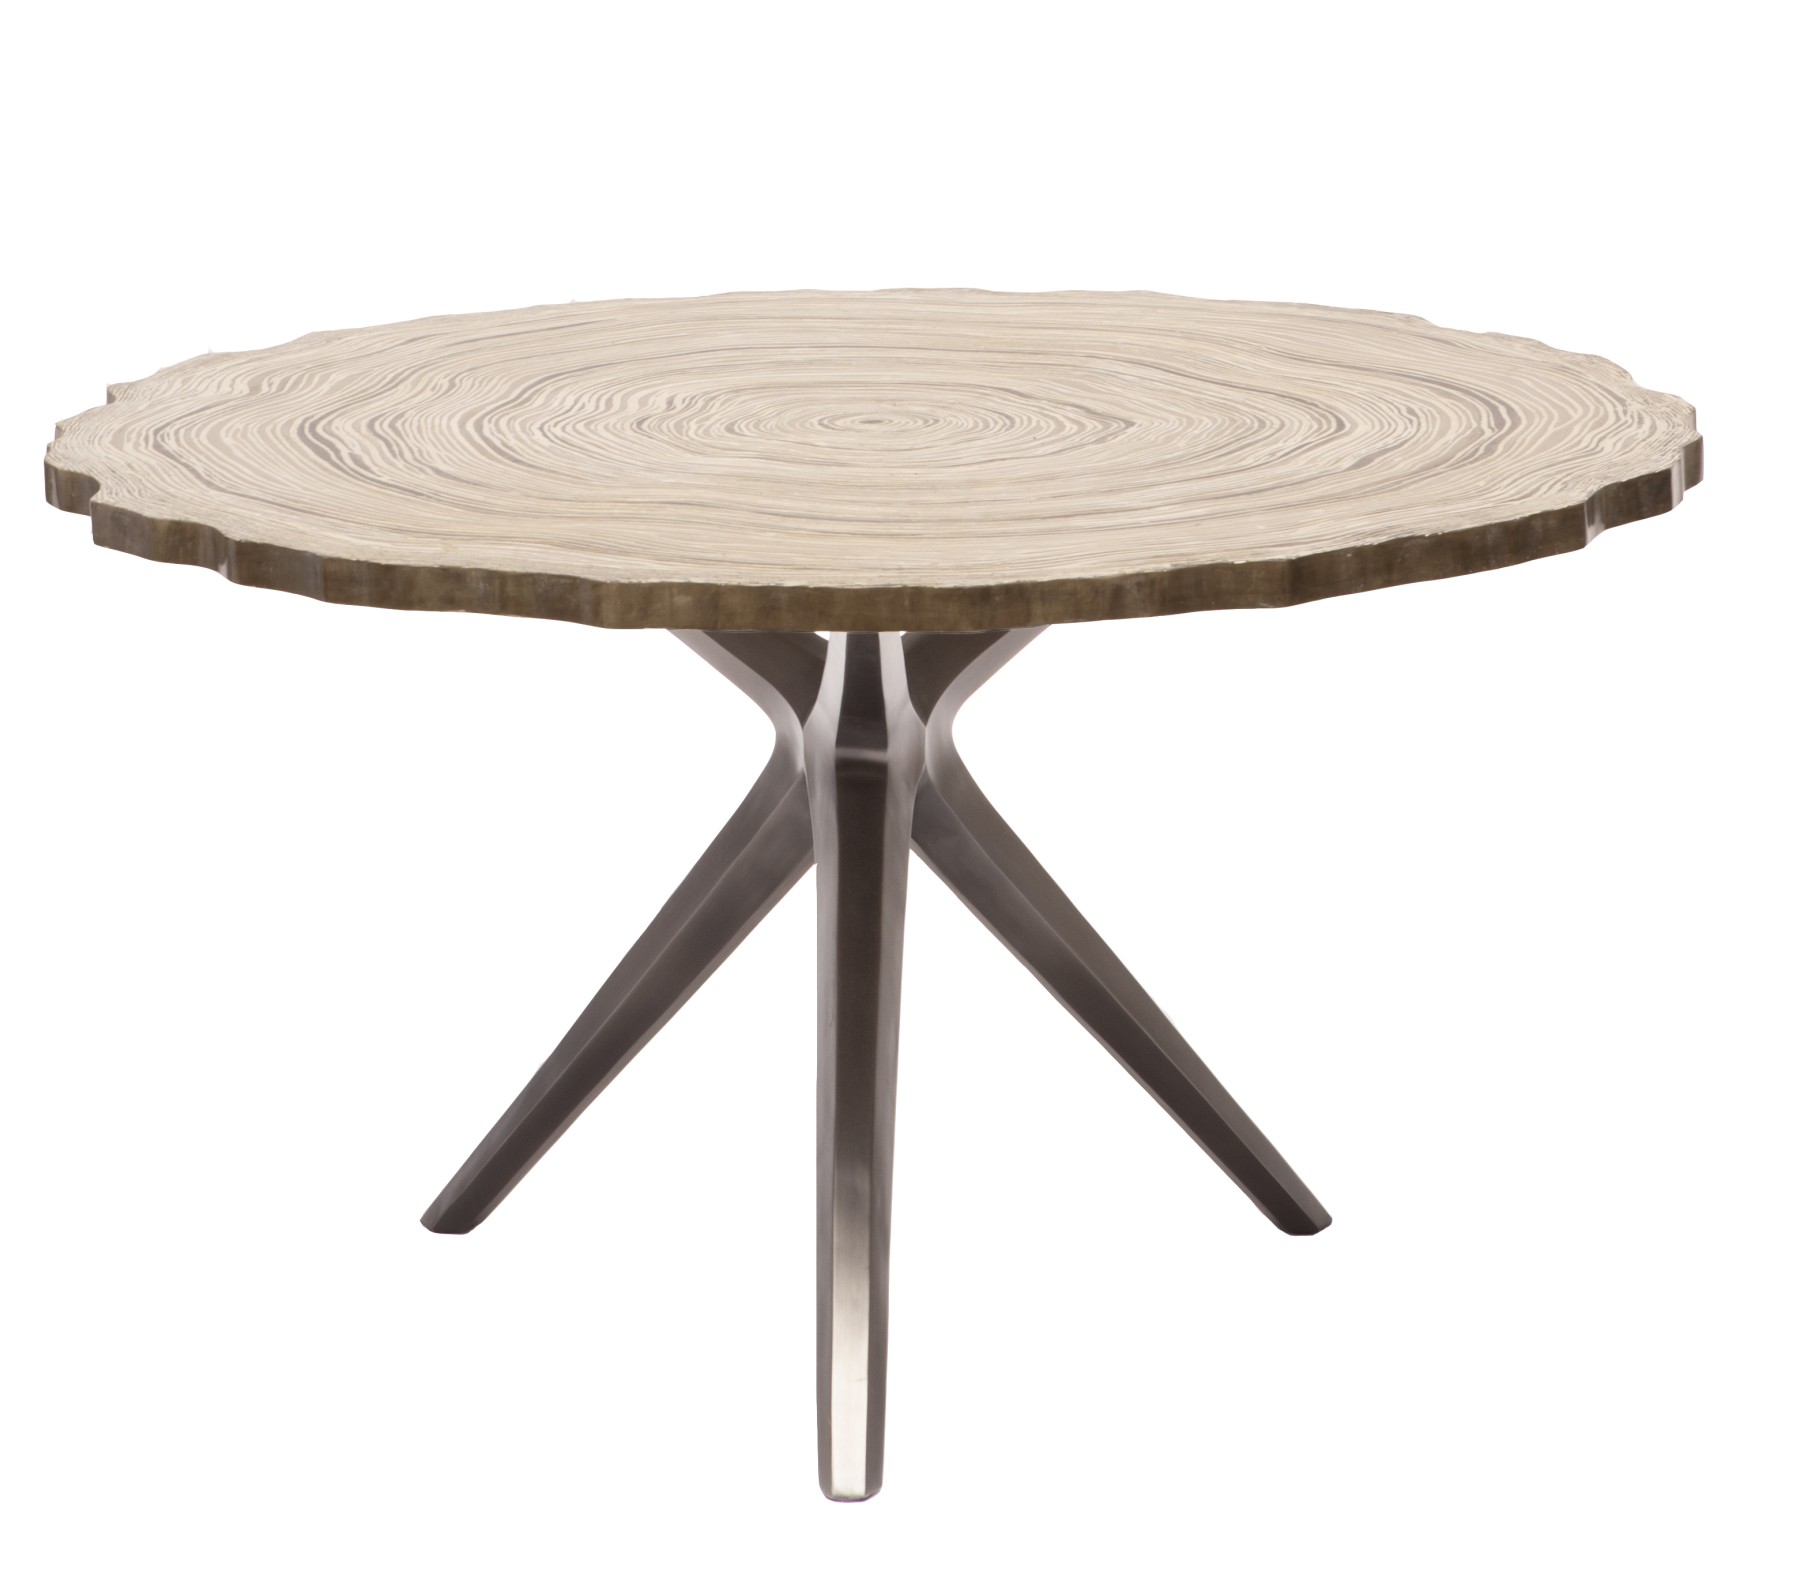 Jackdaw Dining Table - Base Only